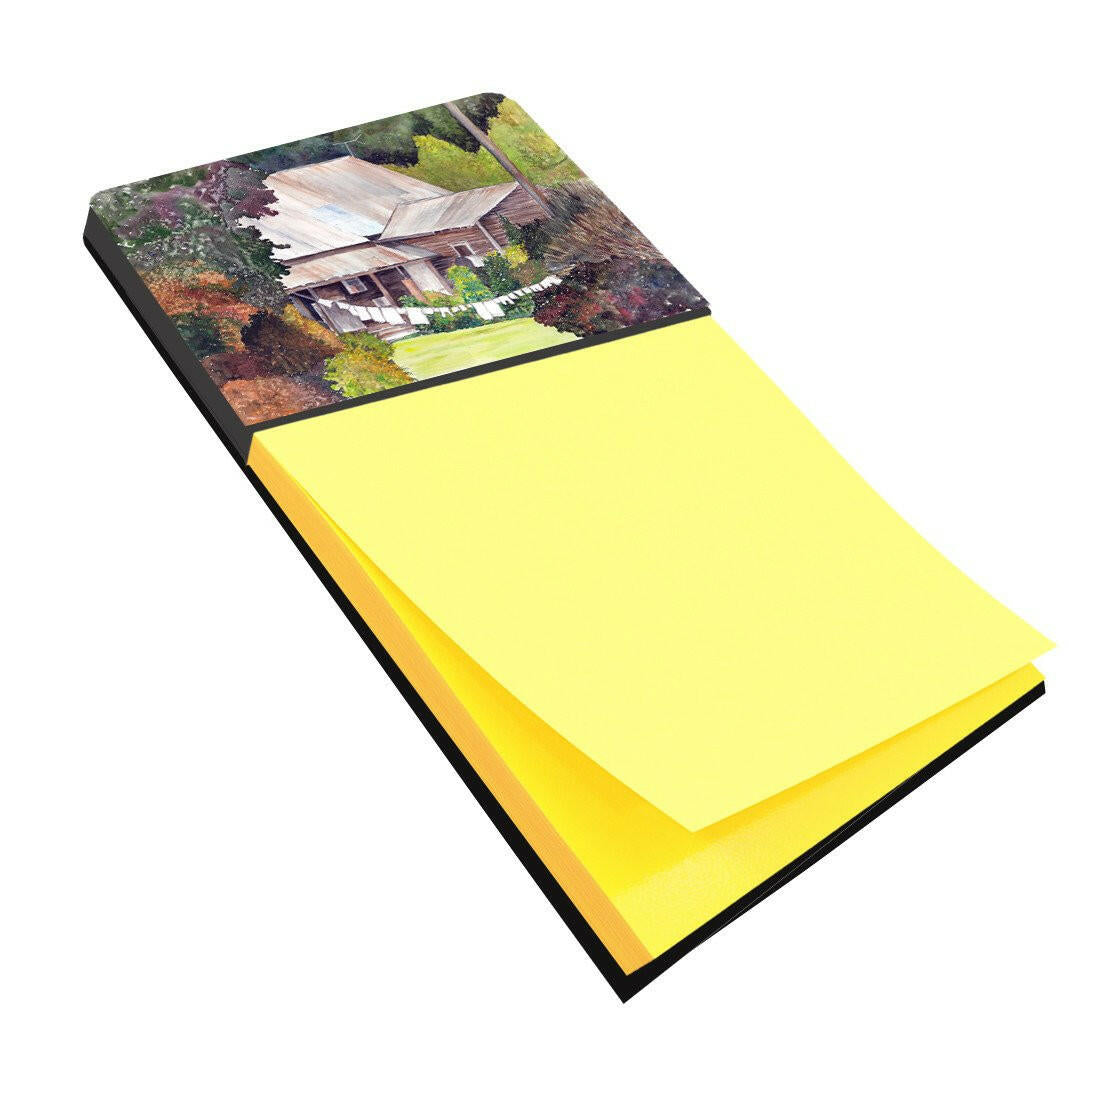 Wash Day Refiillable Sticky Note Holder or Postit Note Dispenser 8741SN by Caroline's Treasures